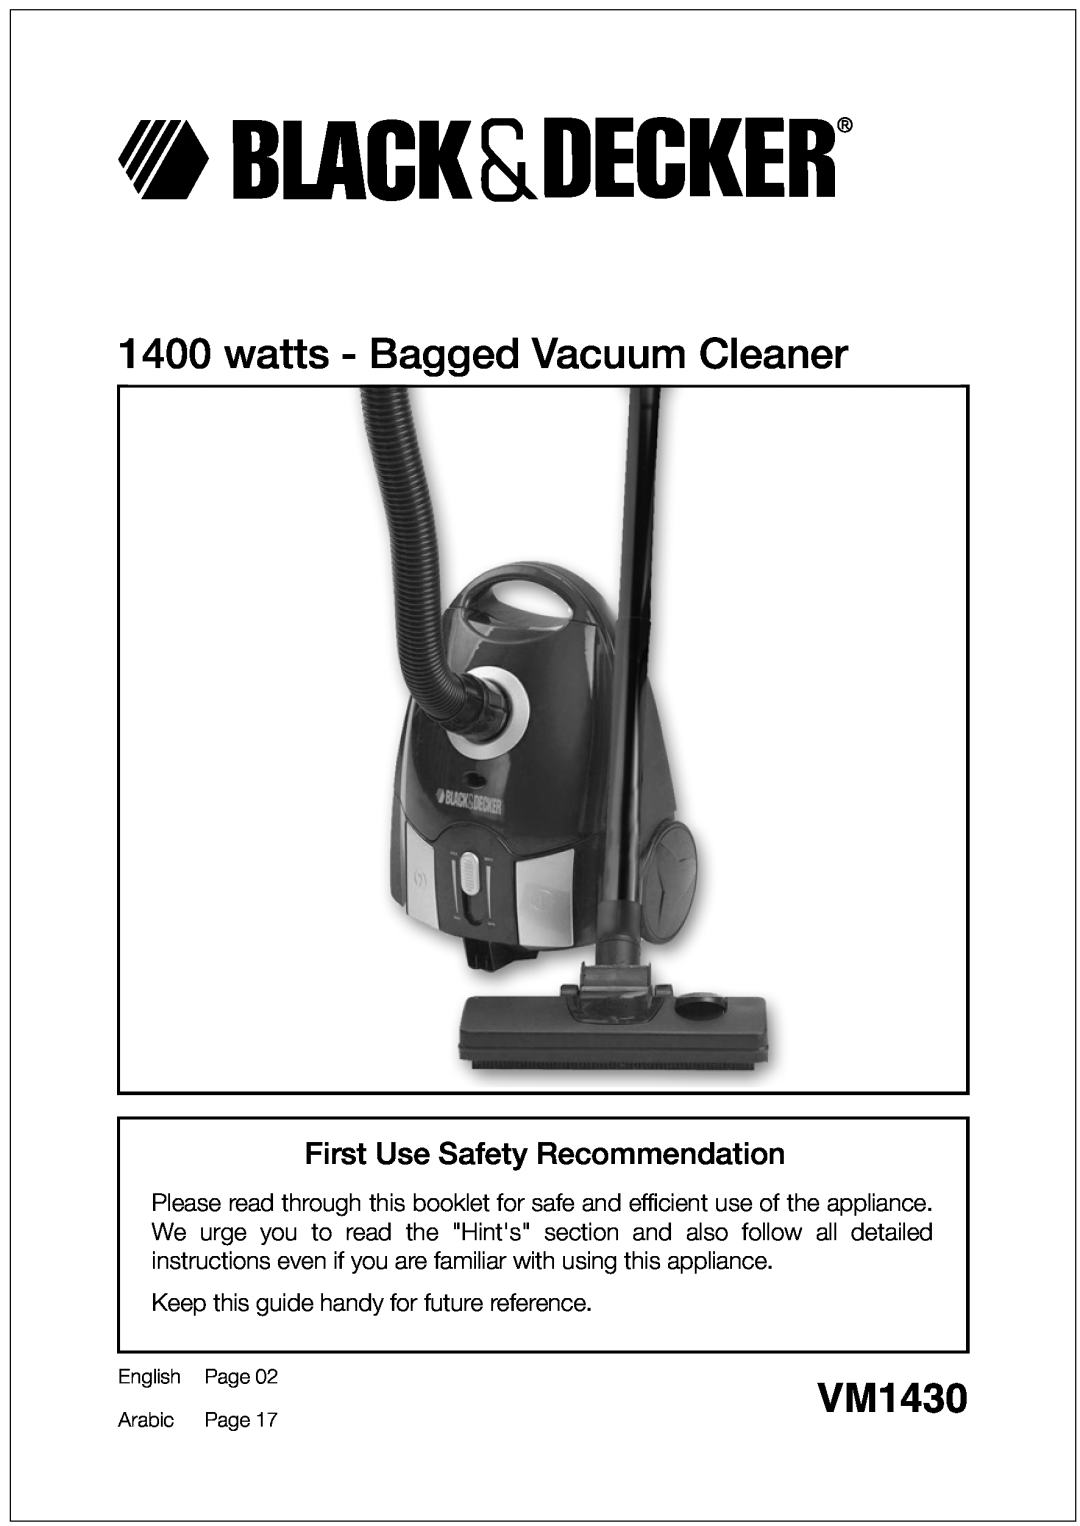 Black & Decker VM1430 manual watts - Bagged Vacuum Cleaner, First Use Safety Recommendation 